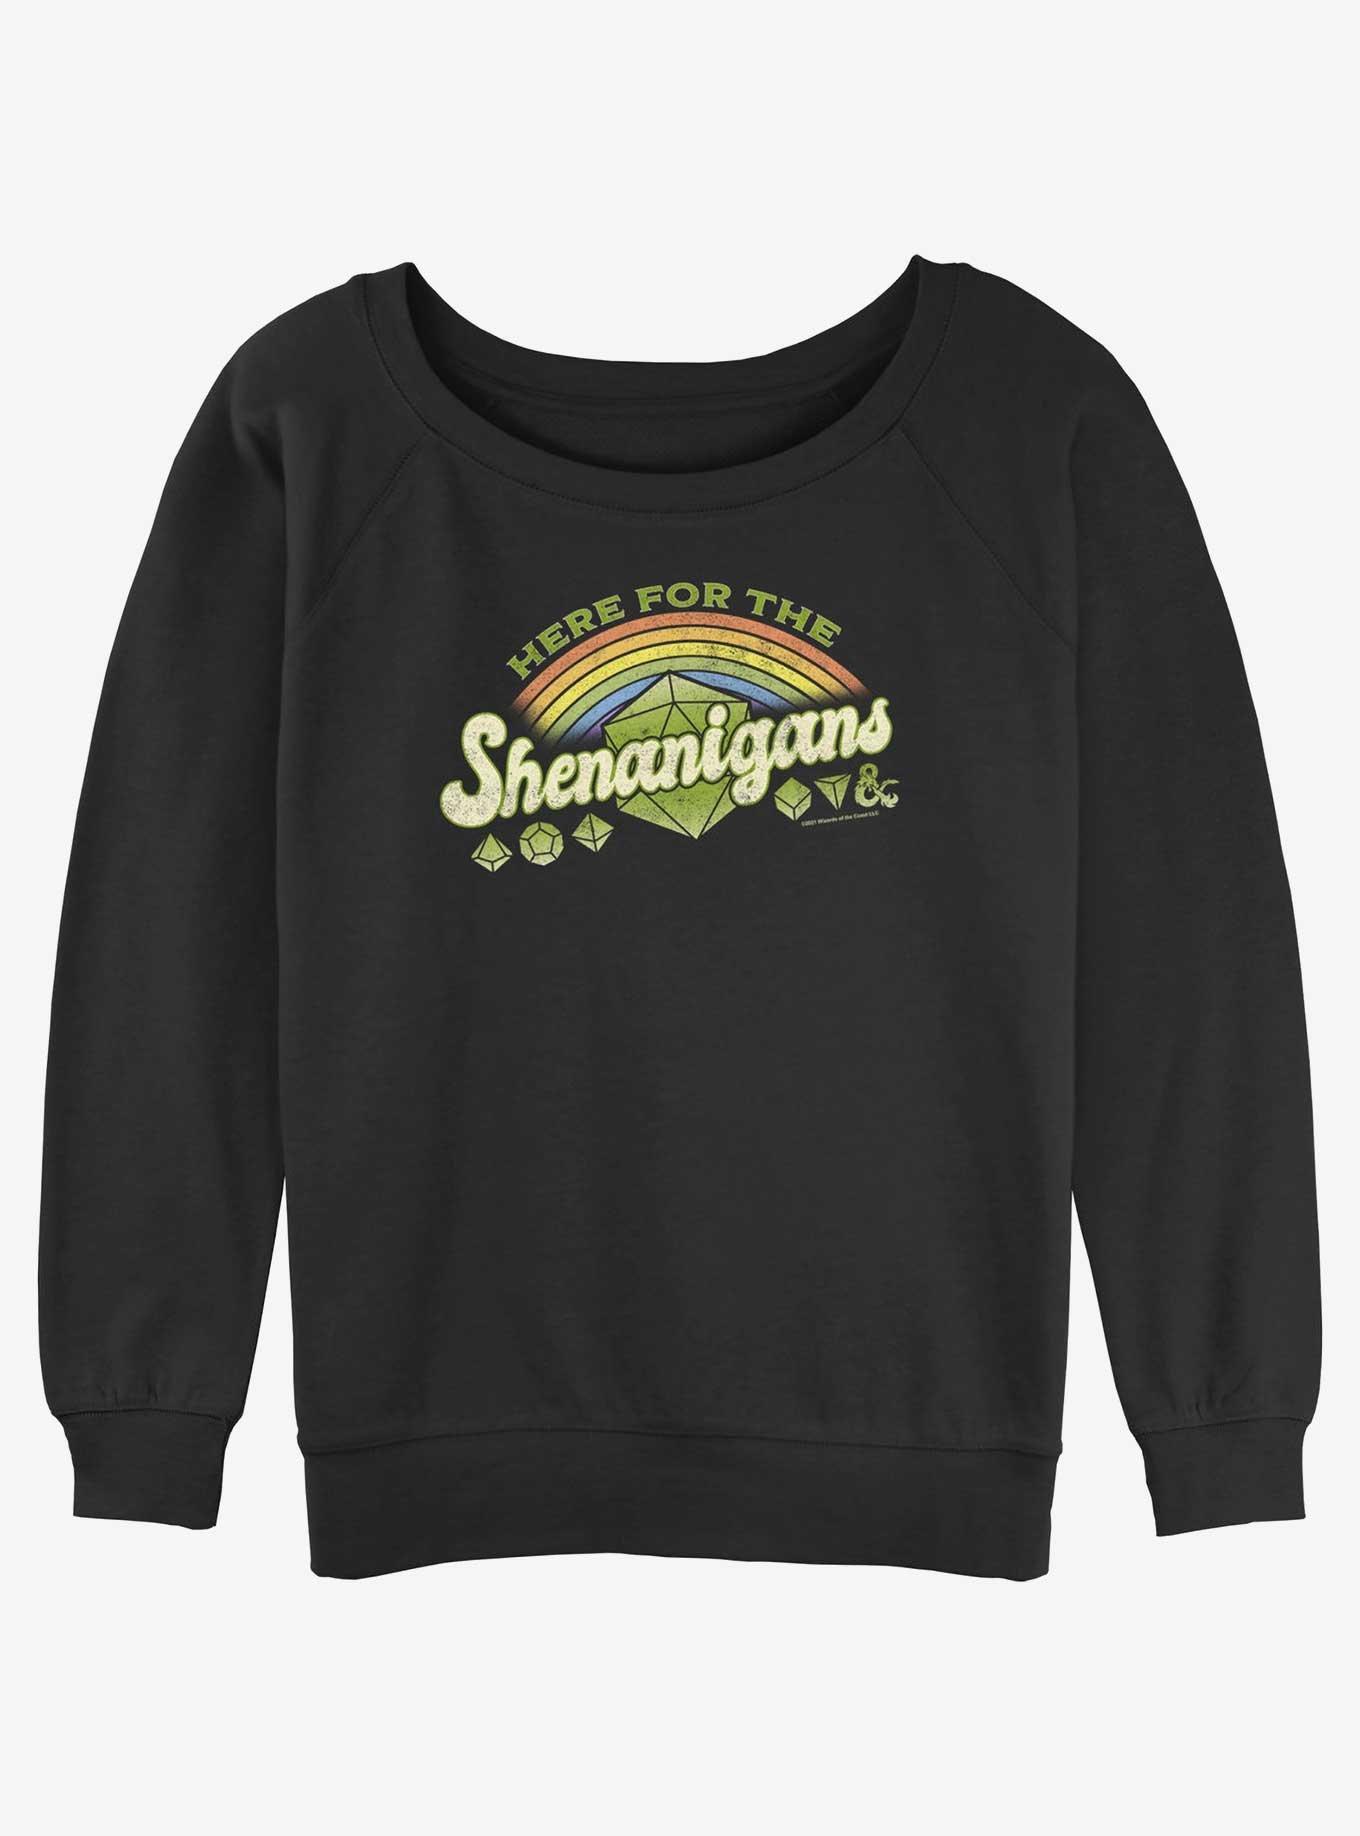 Dungeons & Dragons Here For Shenanigans Womens Slouchy Sweatshirt, BLACK, hi-res